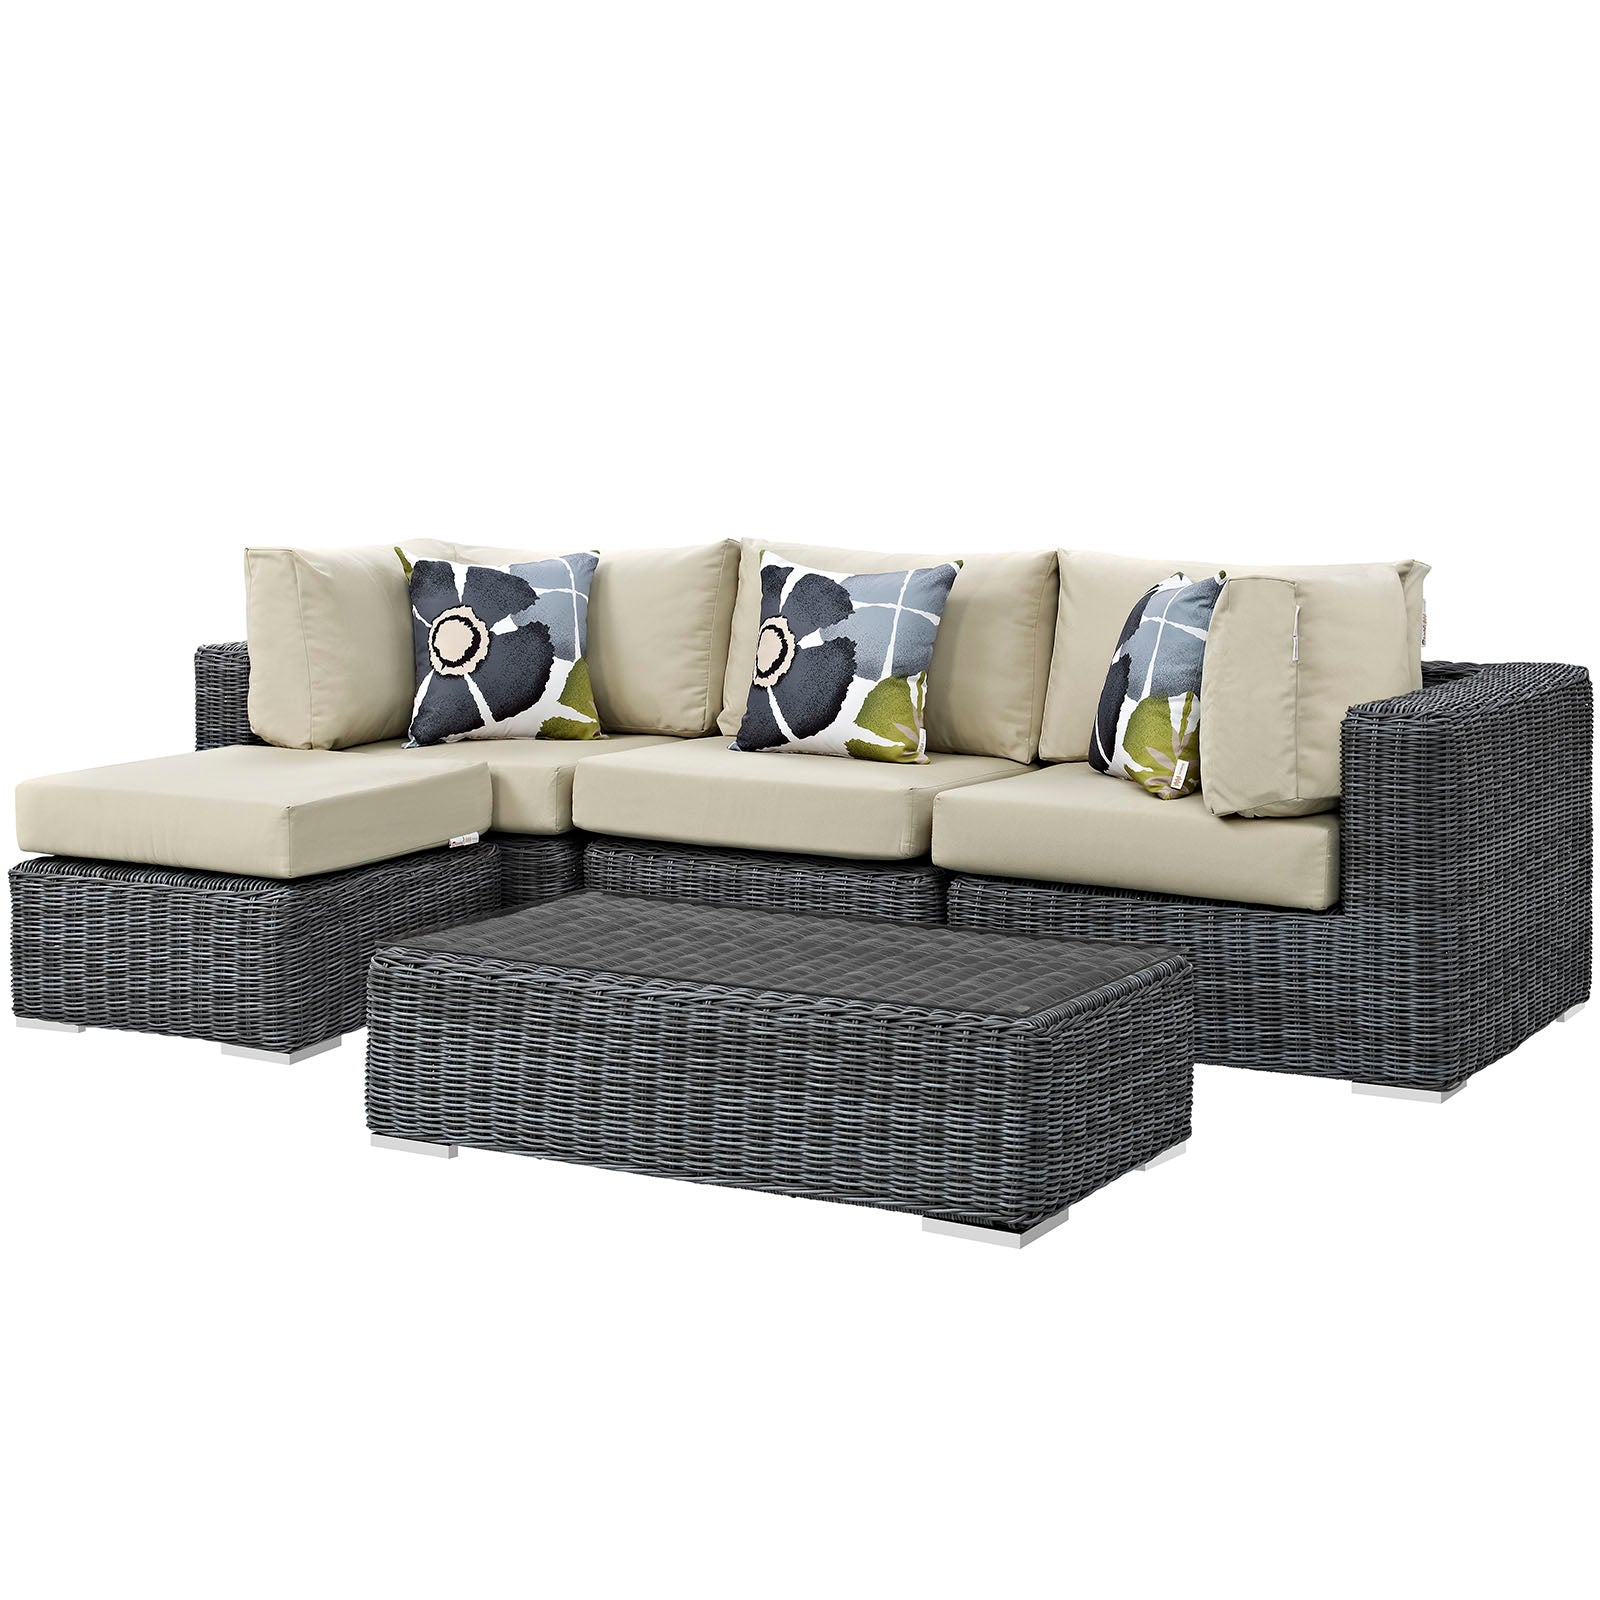 Summon 5 Piece 4 Seater With Table and Pillows Outdoor Patio Sunbrella Sectional Set